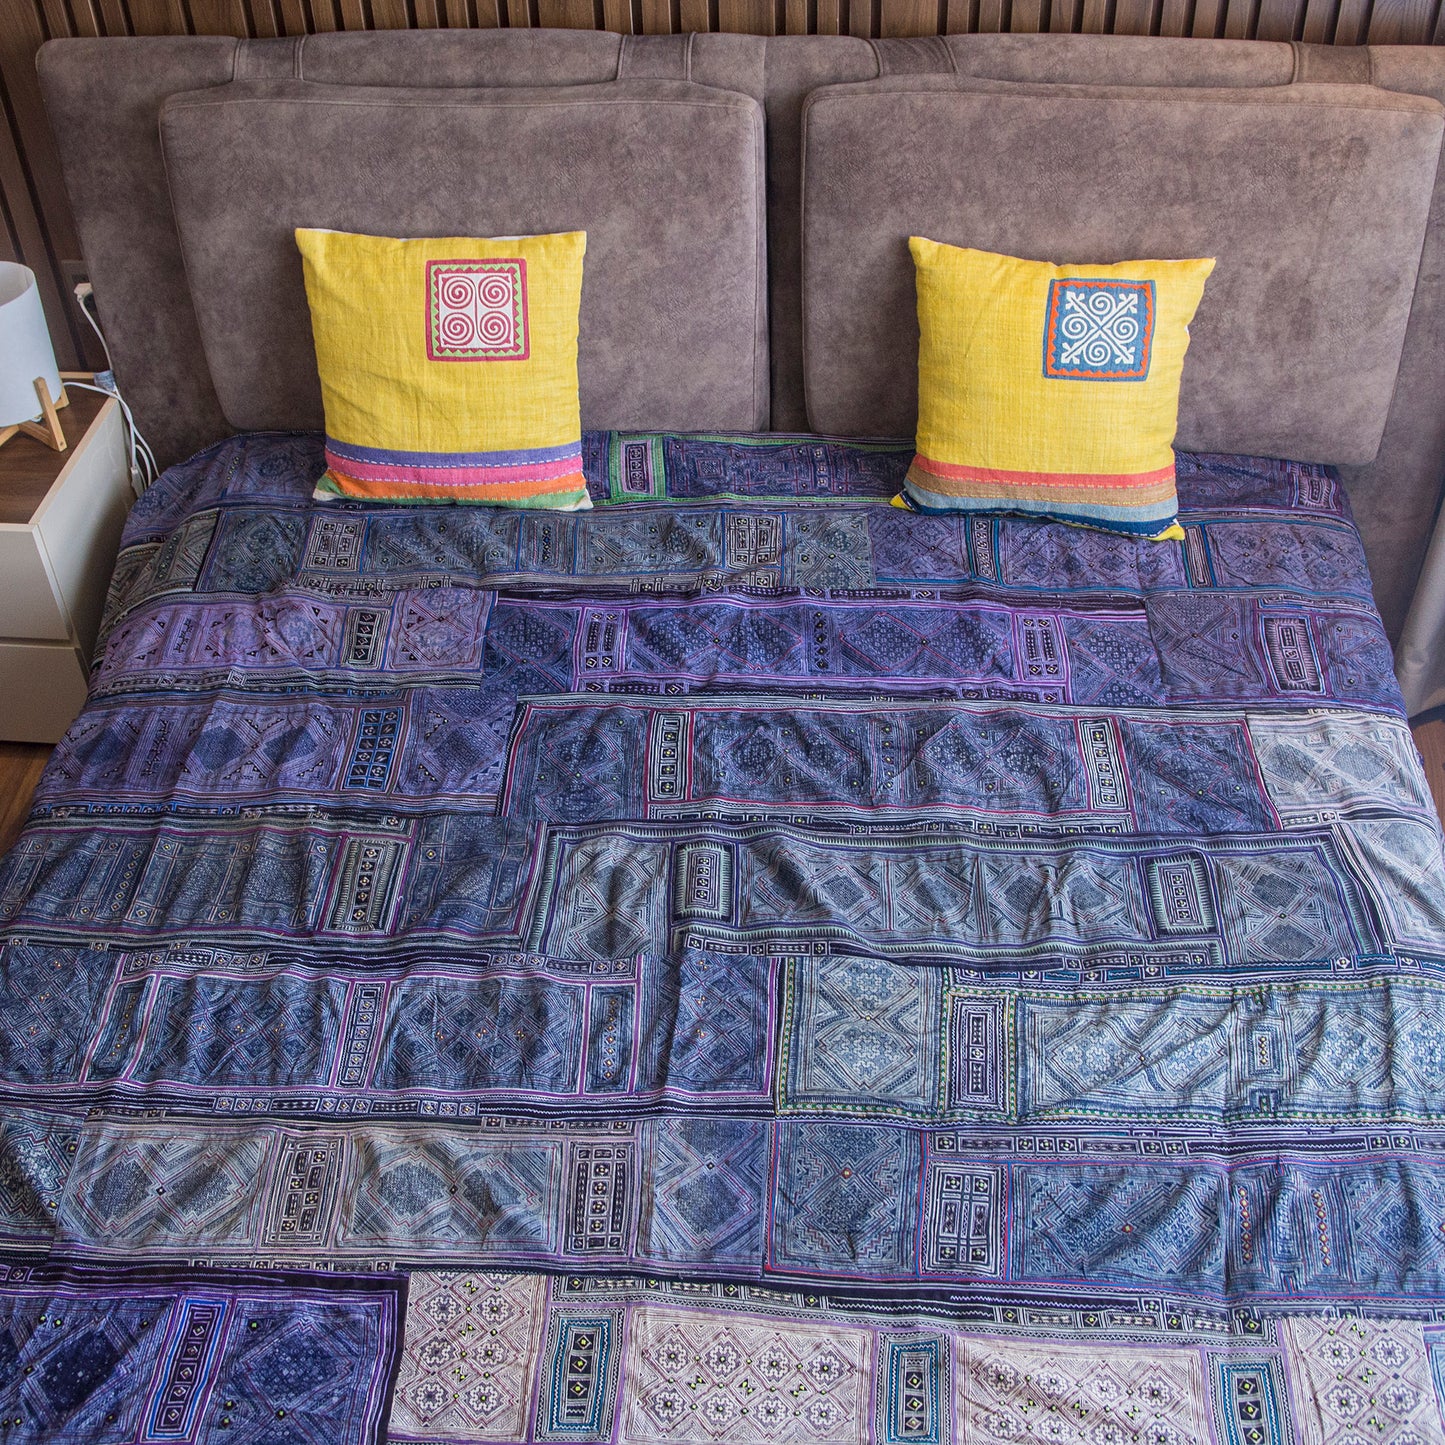 Handmade batik, H'mong authentic fabric, dual-sized bed cover for king and queen sized beds